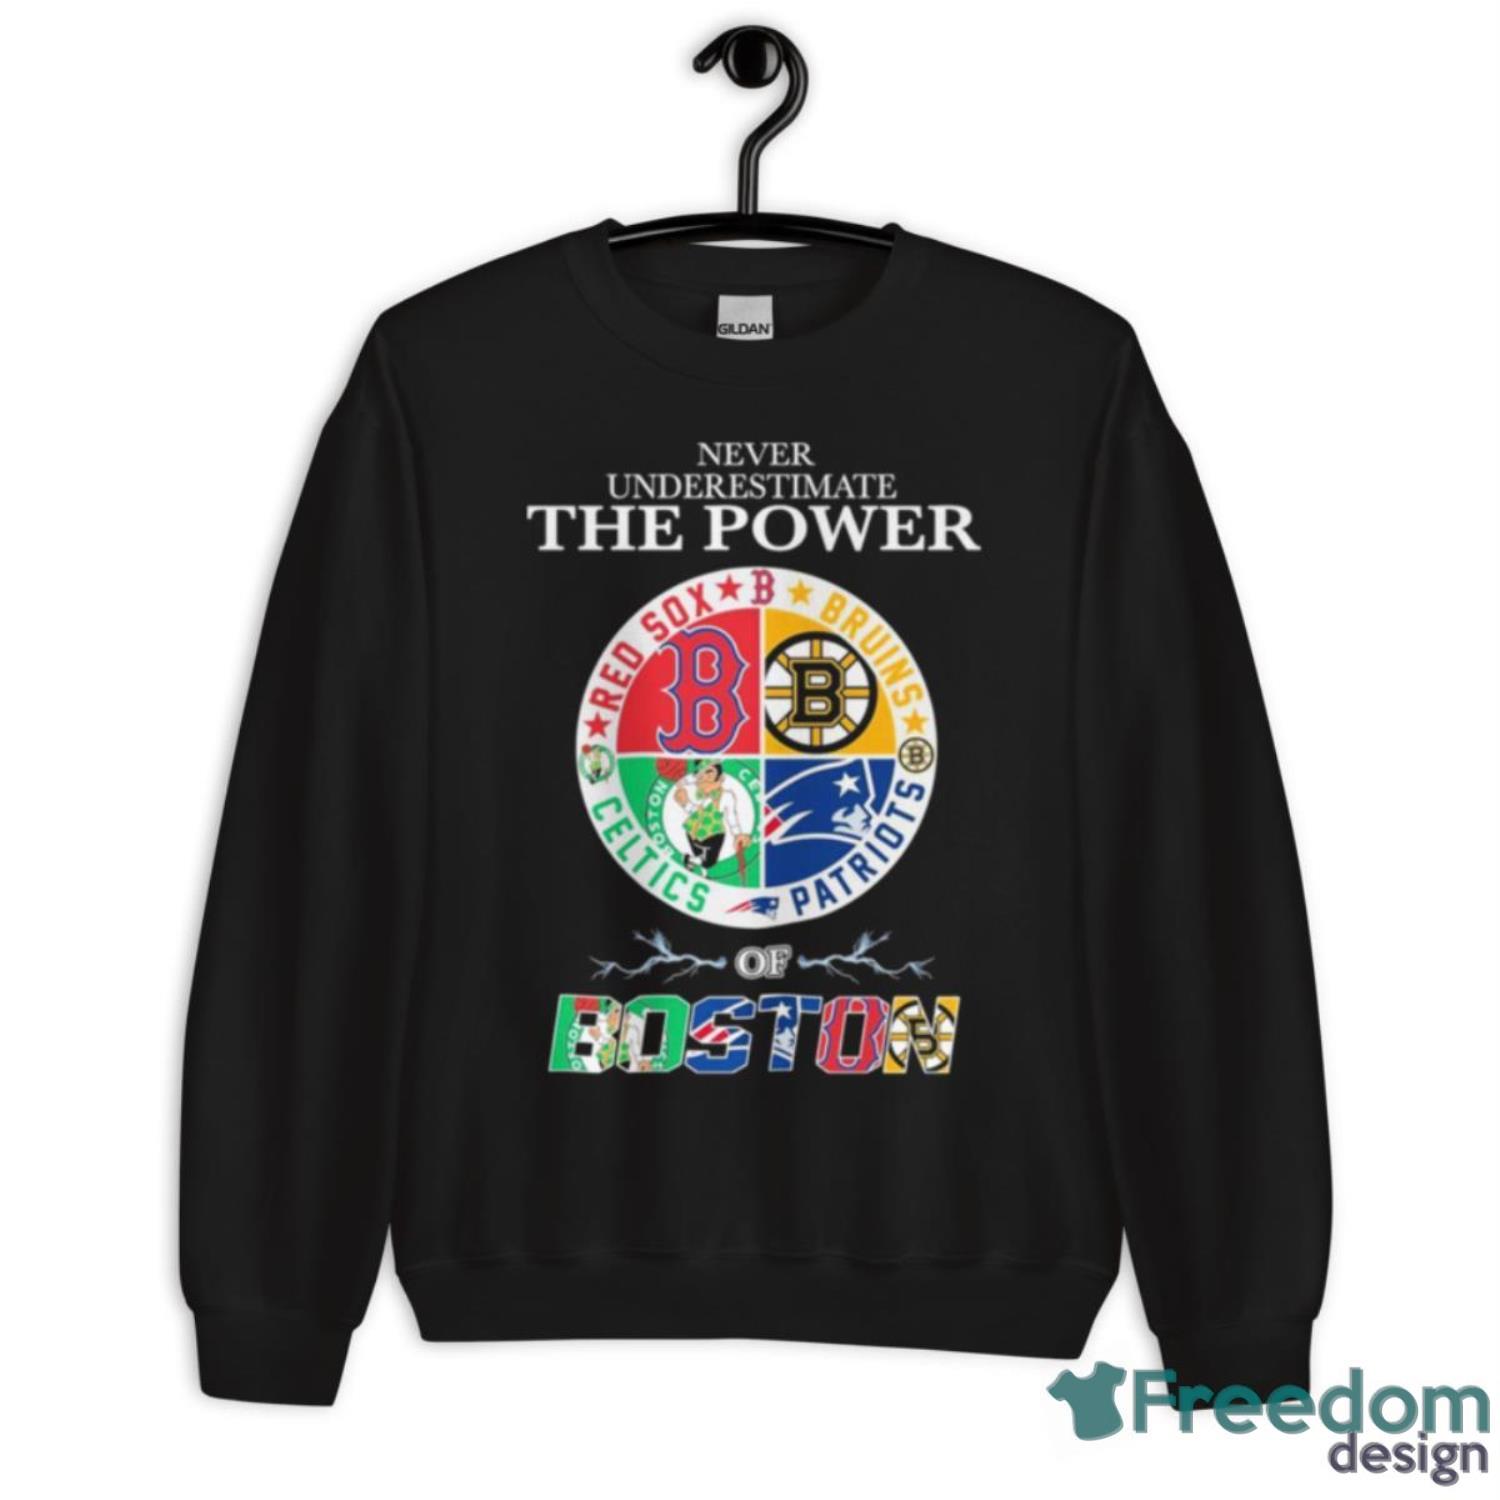 Red Sox Bruins Patriots And Celtics Never Underestimate The Power Of Boston  Shirt - Freedomdesign